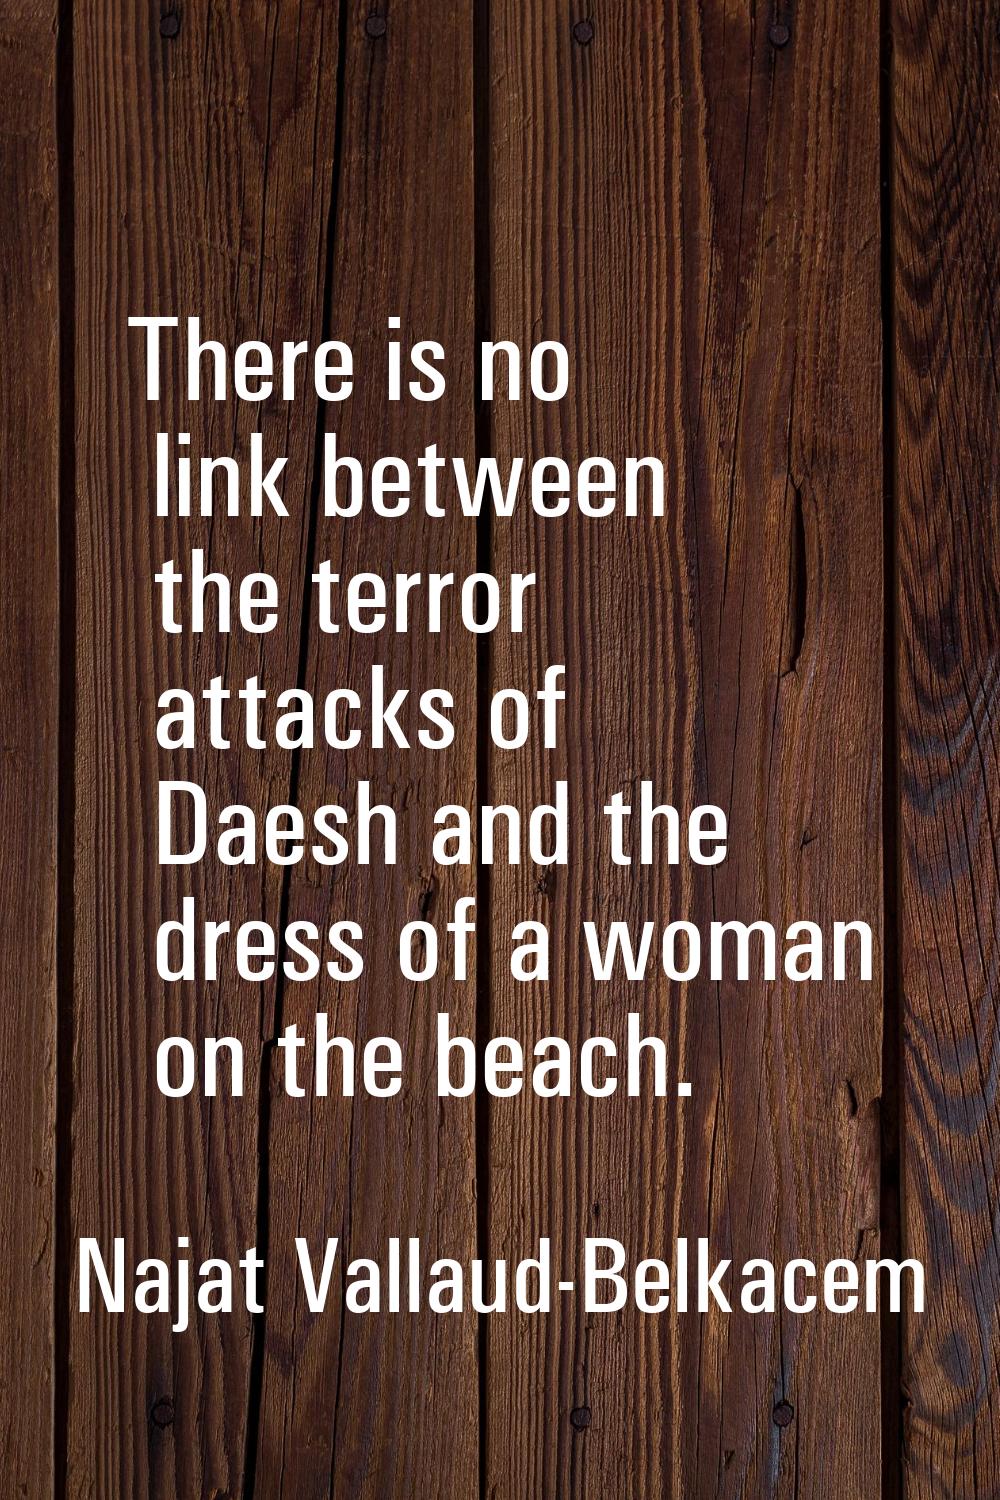 There is no link between the terror attacks of Daesh and the dress of a woman on the beach.